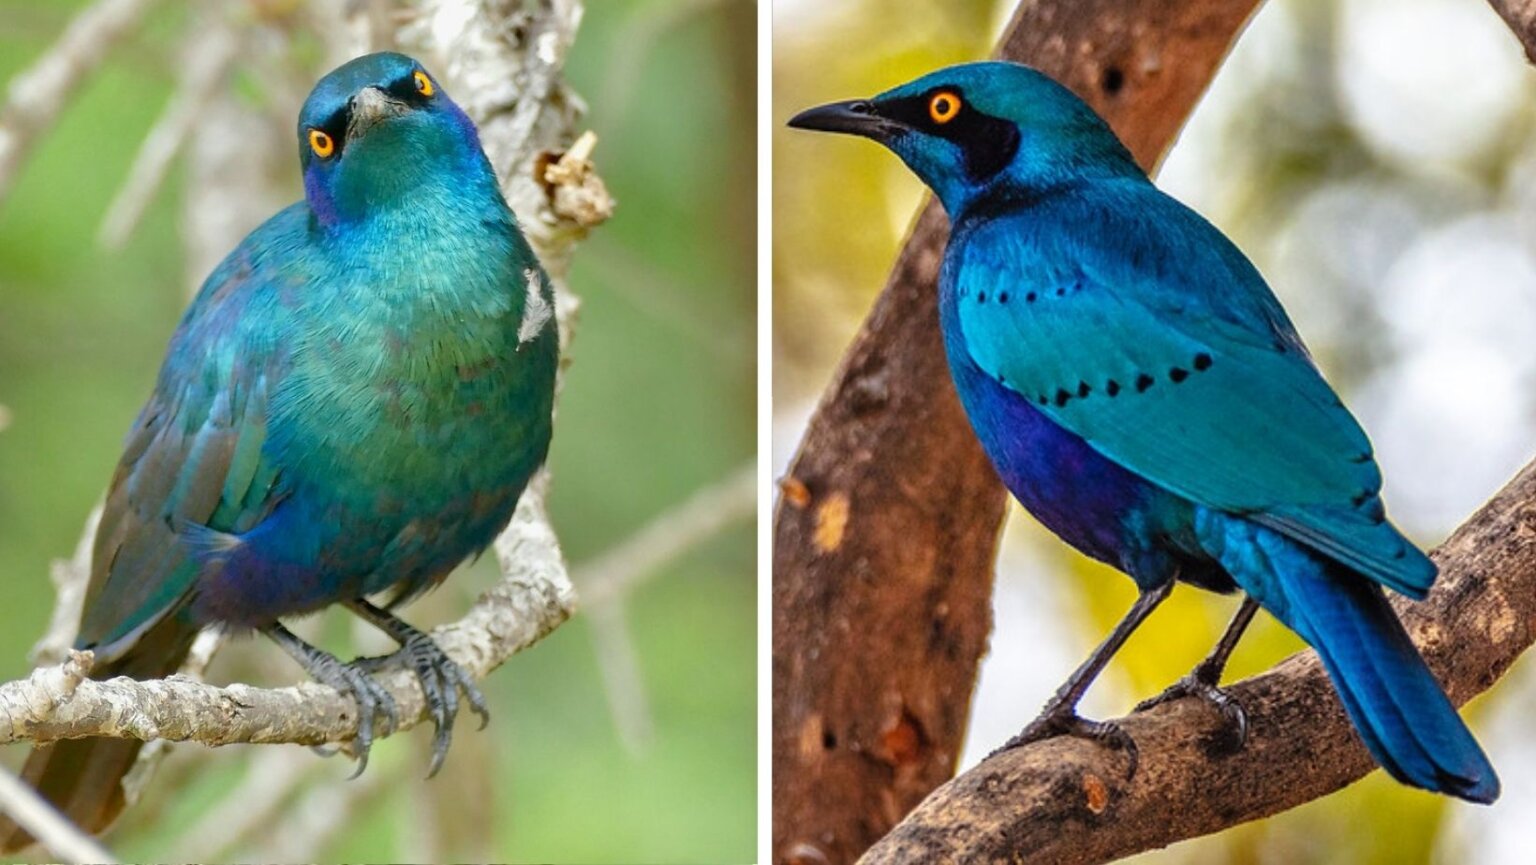 A brilliant iridescent blue-green bird with beautiful contrasting iridescent royal blue to violet tones – MEET THE GREATER BLUE-EARED STARLING!